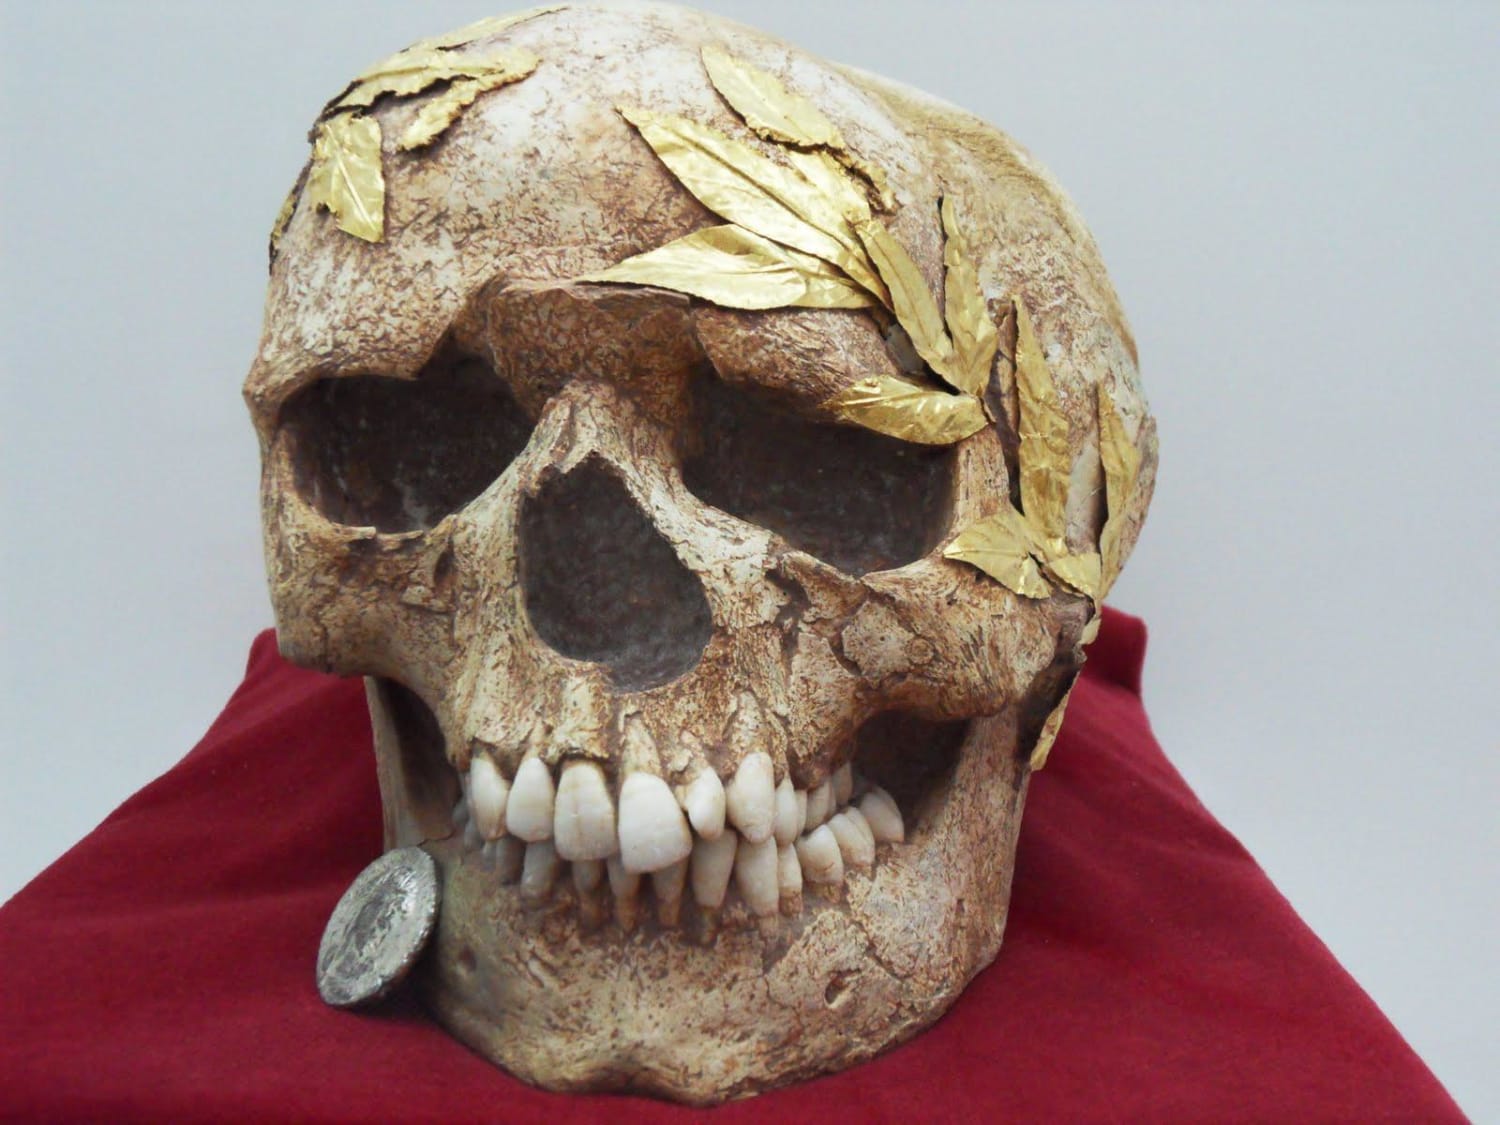 Skull of a crowned athlete with a gold wreath from Agios Nikolaos, Crete, of the Hellenistic period. The flesh melted with time, but the wreath stuck and remained on the skull.